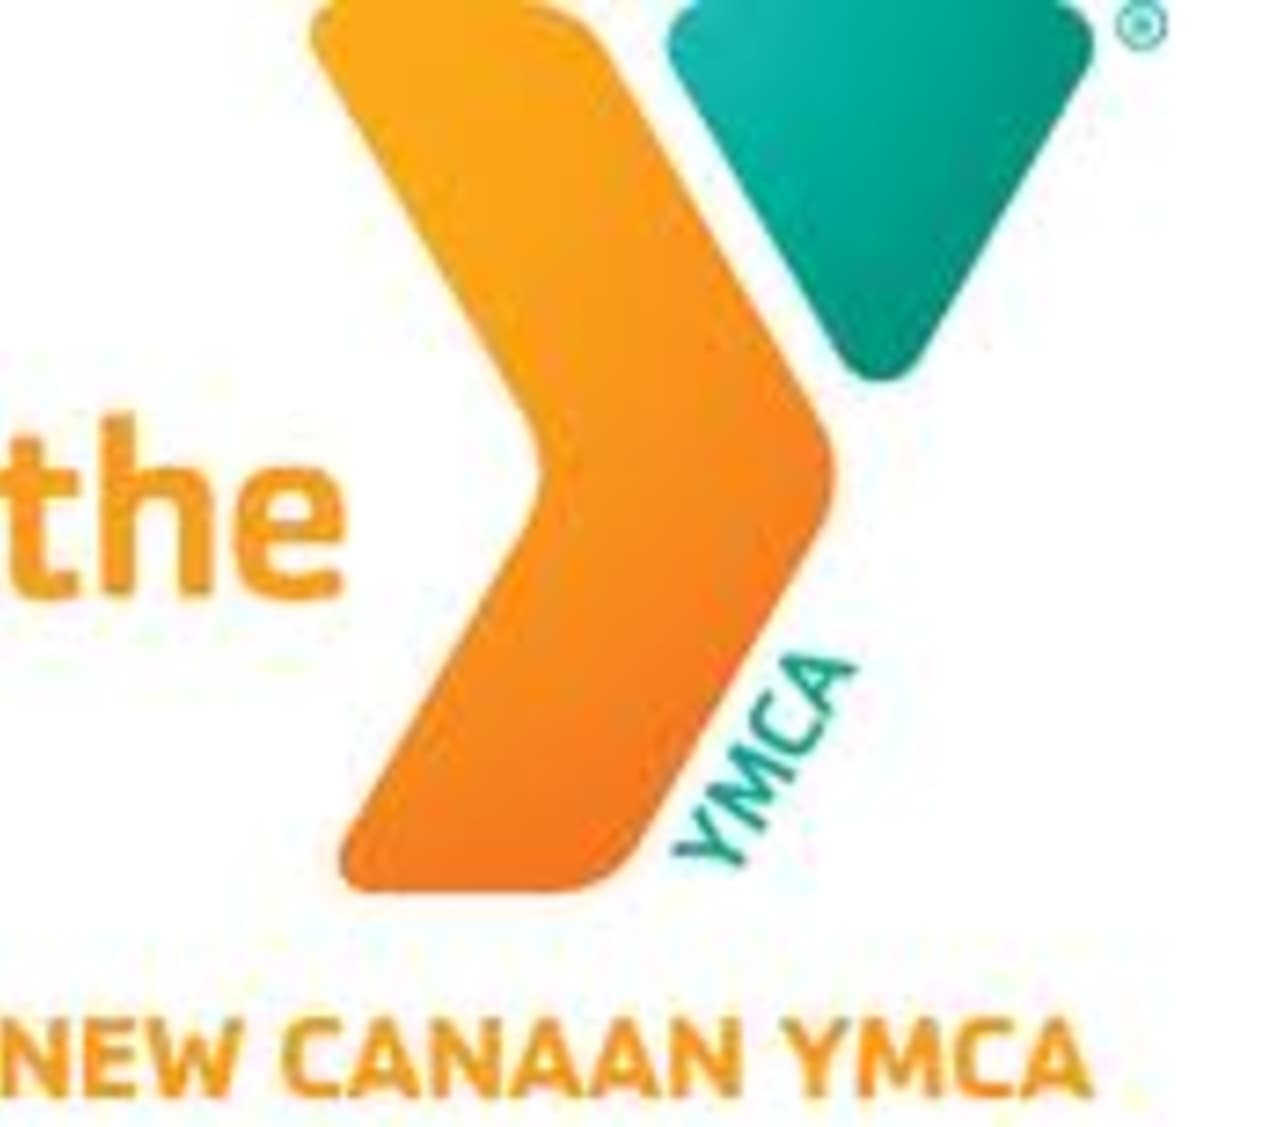 The New Canaan YMCA is having a special one-day camp Thursday.